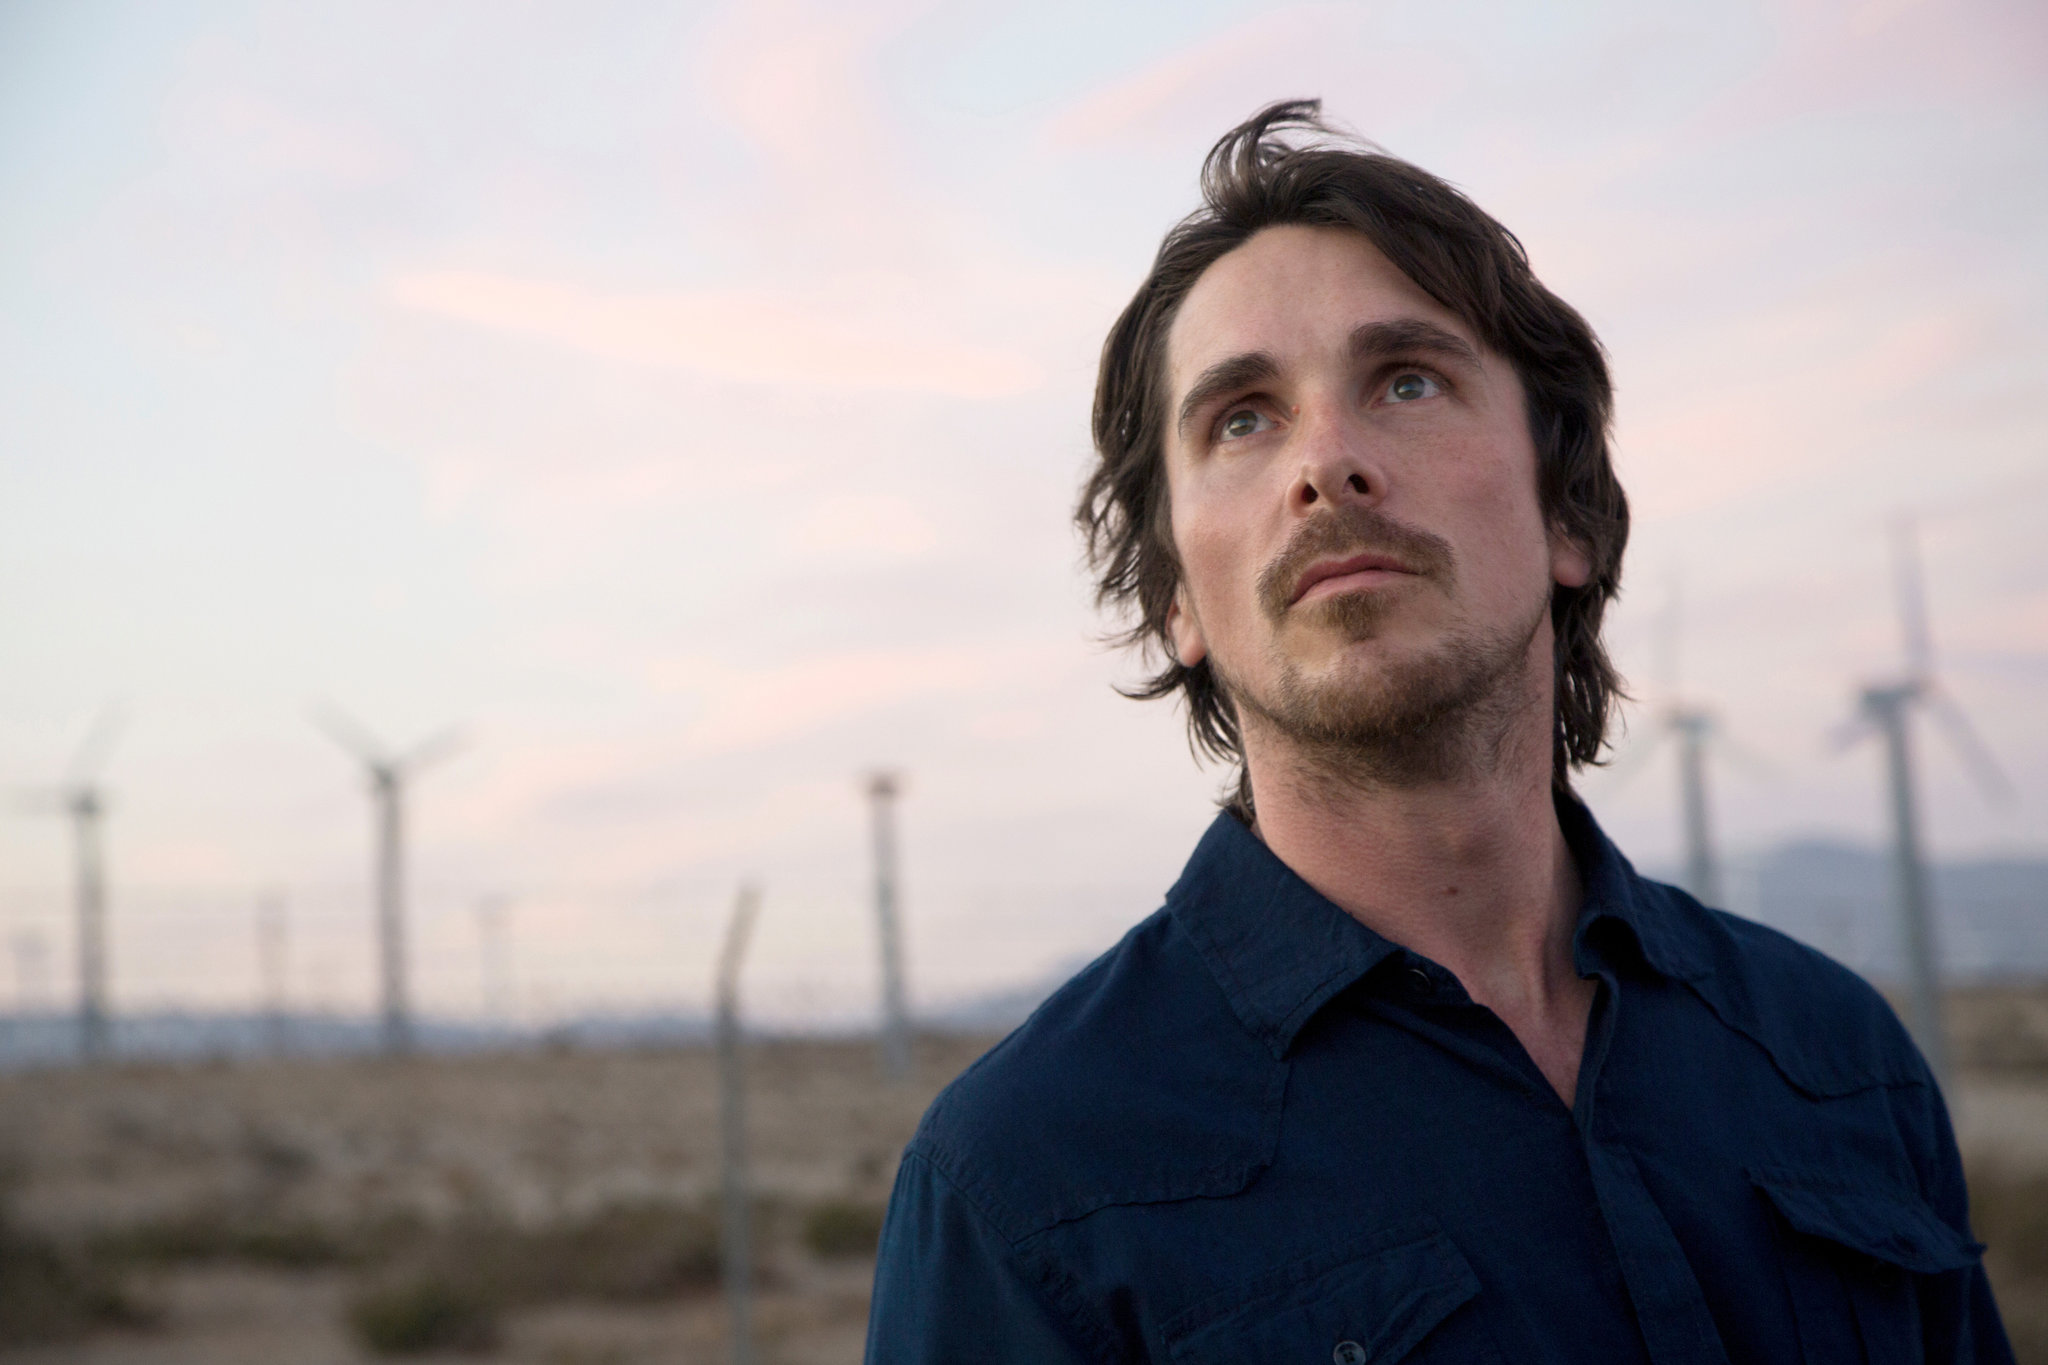 Rotten Tomatoes - From DC to Marvel, Christian Bale is